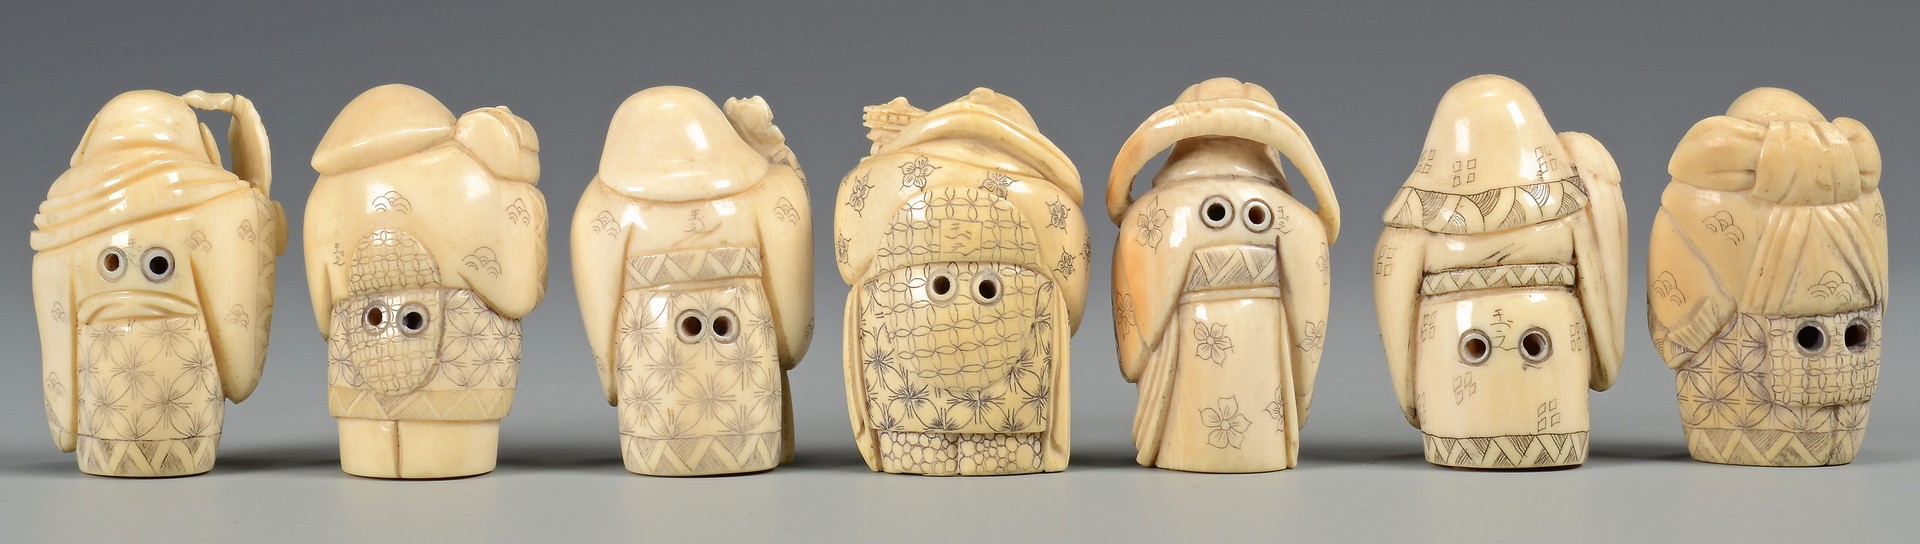 Lot 373: 7 Ivory Immortals & Lacquer Fruit